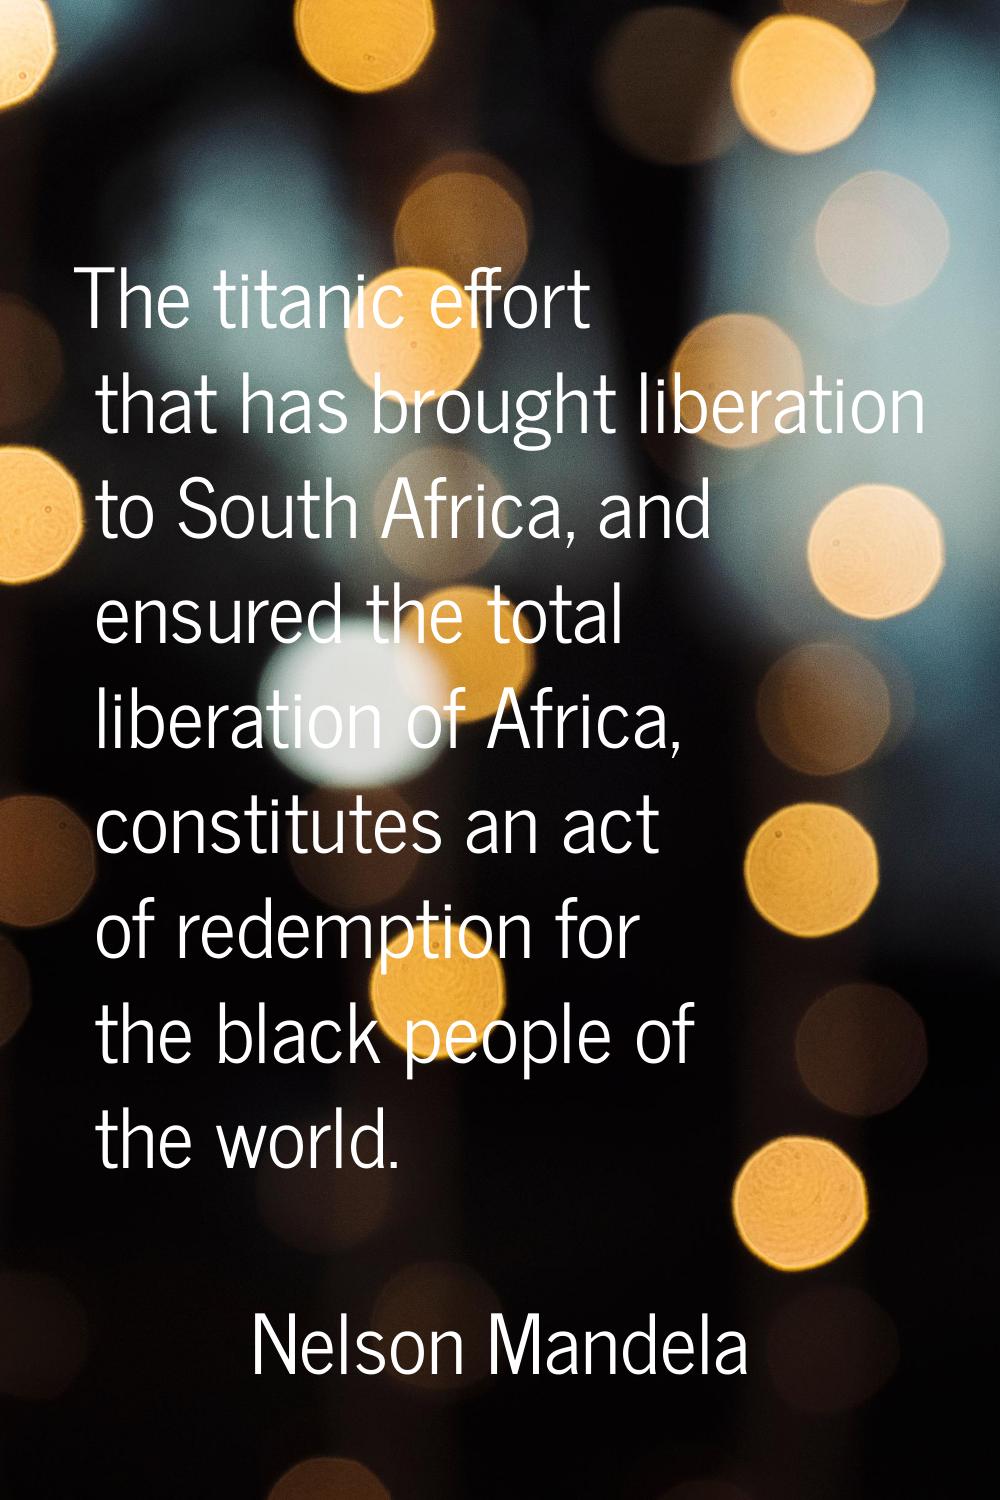 The titanic effort that has brought liberation to South Africa, and ensured the total liberation of